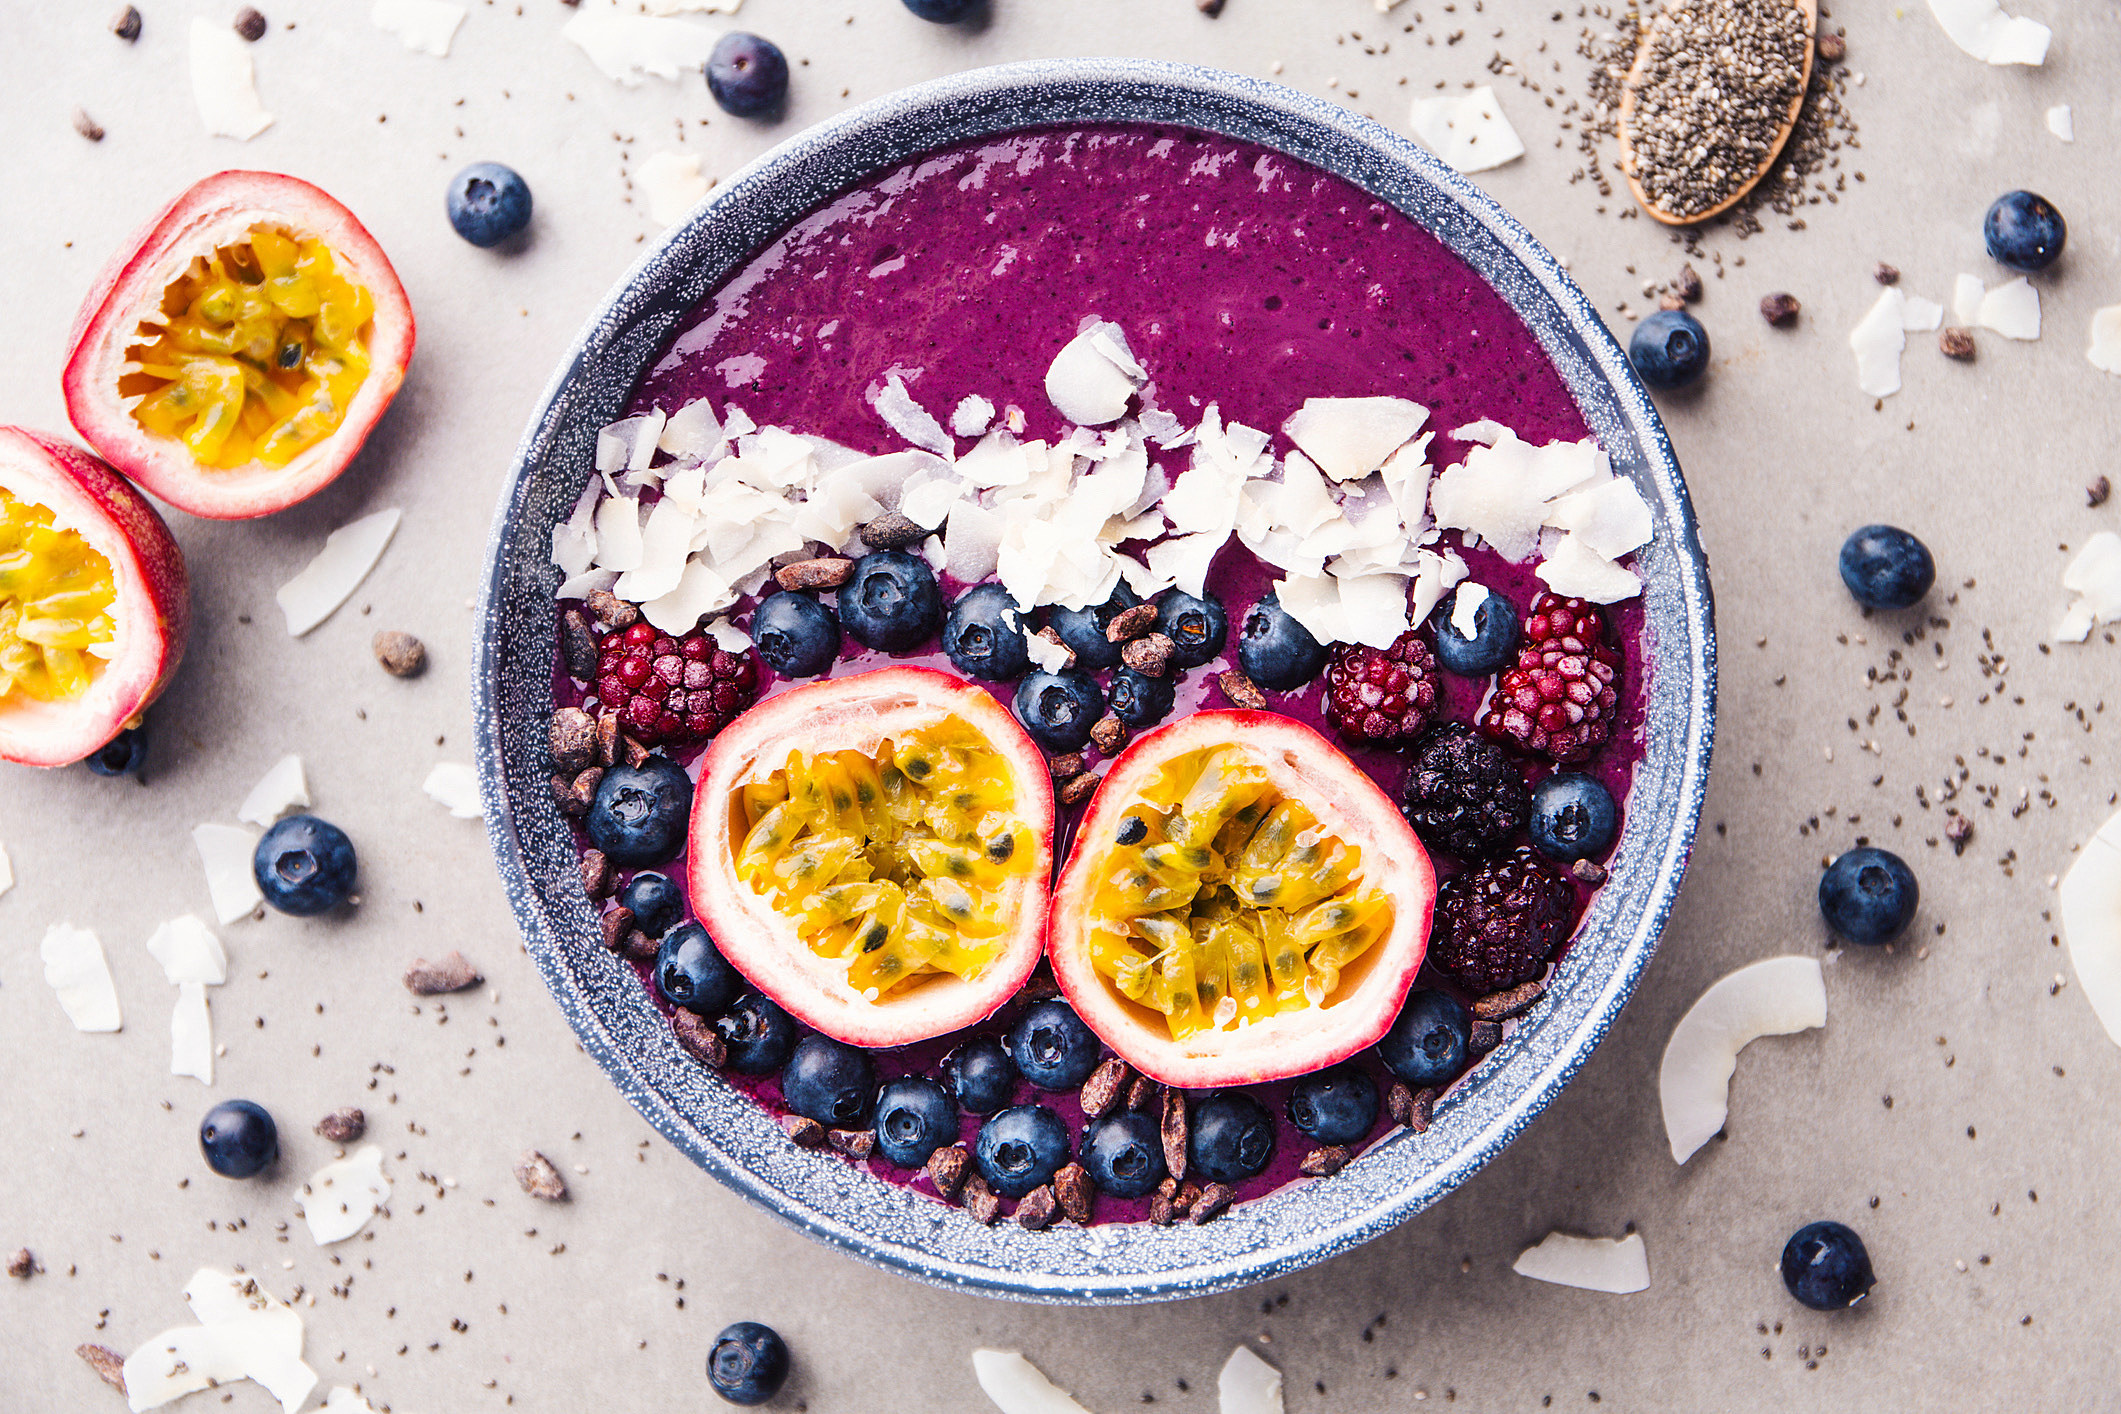 Are Acai Bowls Healthy? Calories and Nutrition